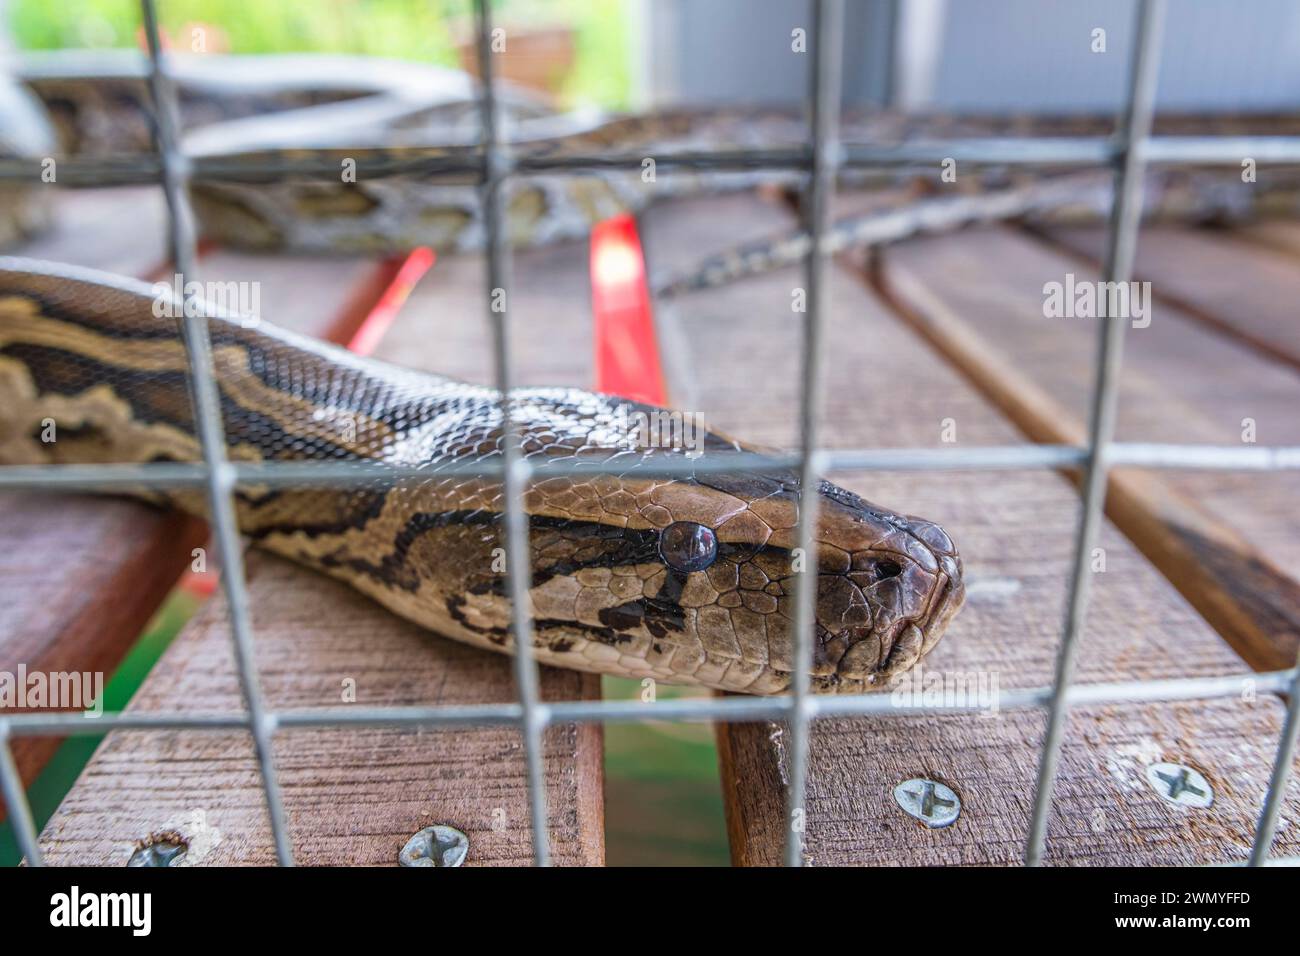 Vietnam, Mekong Delta, Cai Be, snake in a cage Stock Photo